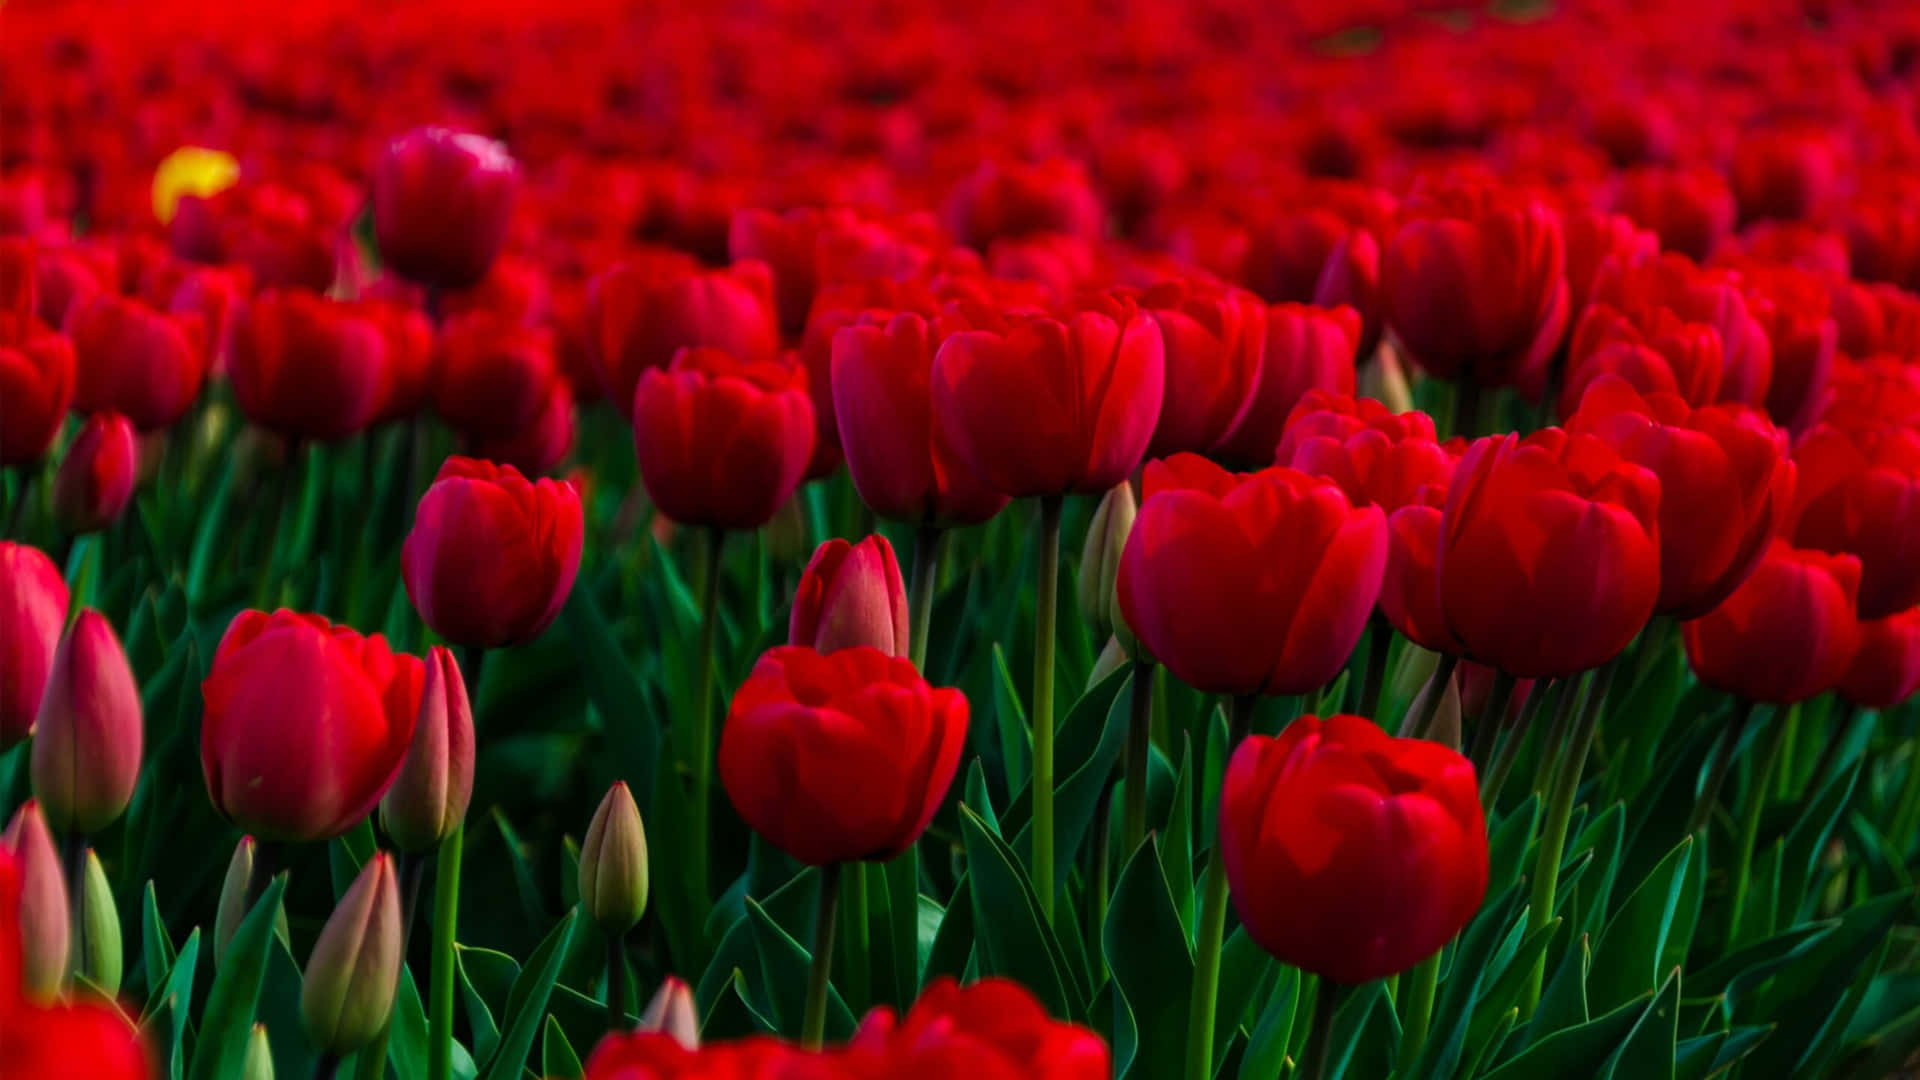 A Field Of Red Tulips In Bloom